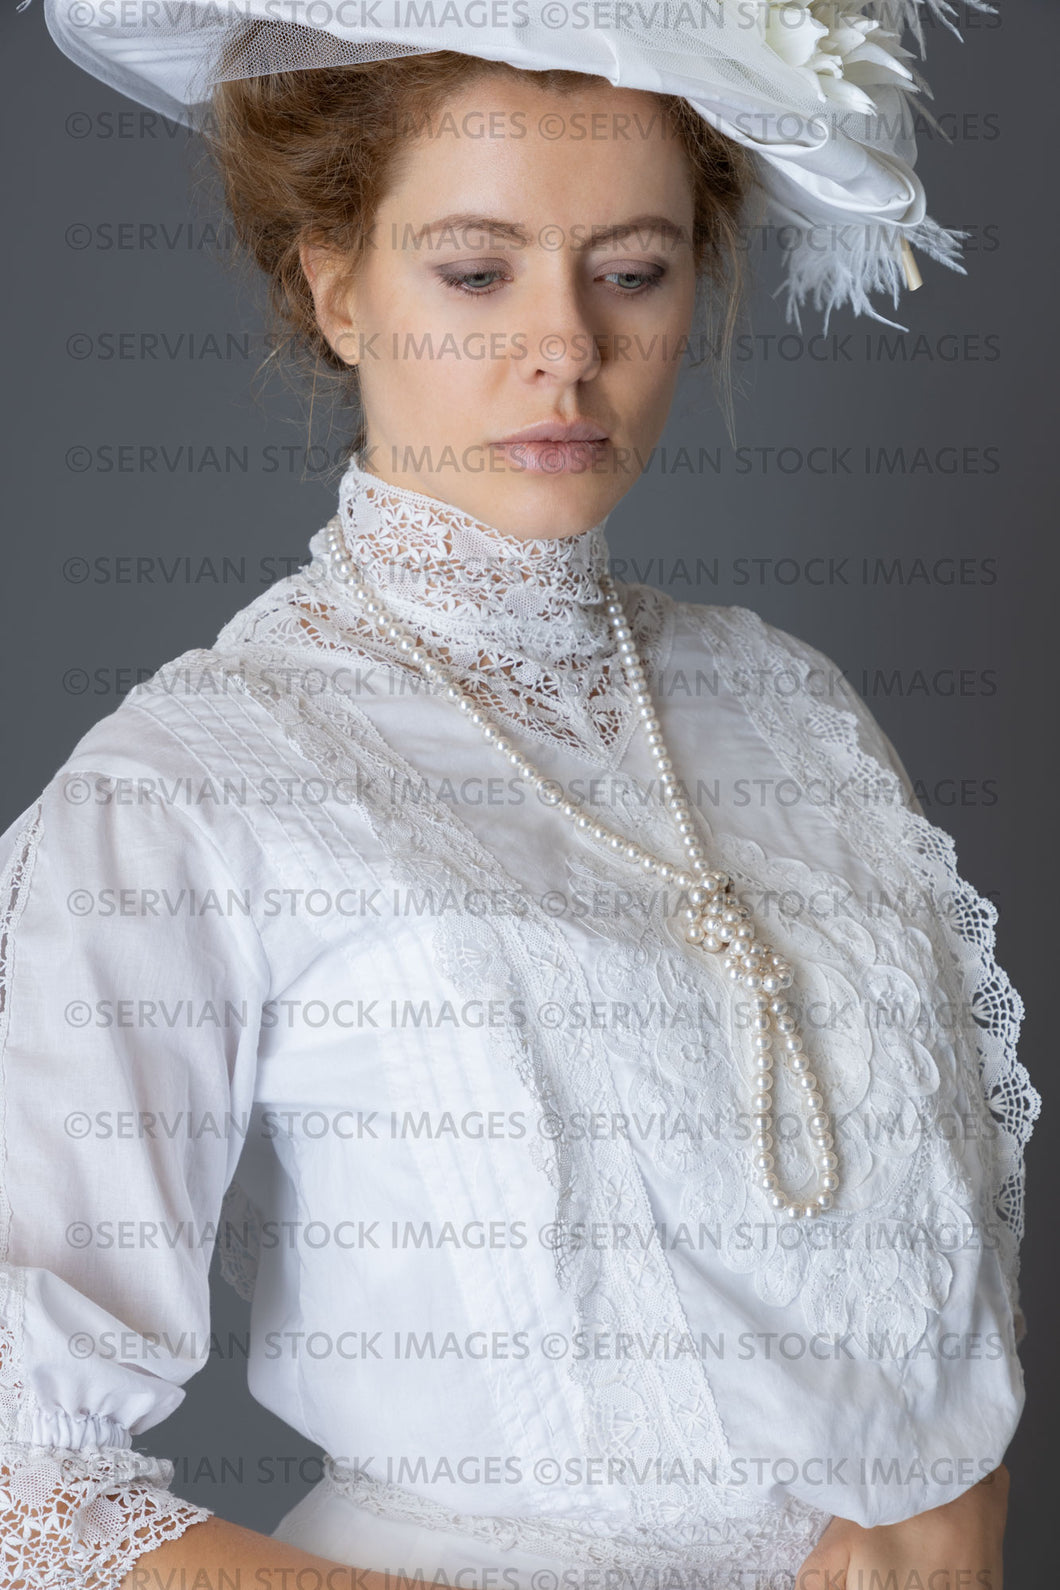 Edwardian woman in a white lace blouse and skirt with a pearl necklace and large hat (Anastasiya 4953)